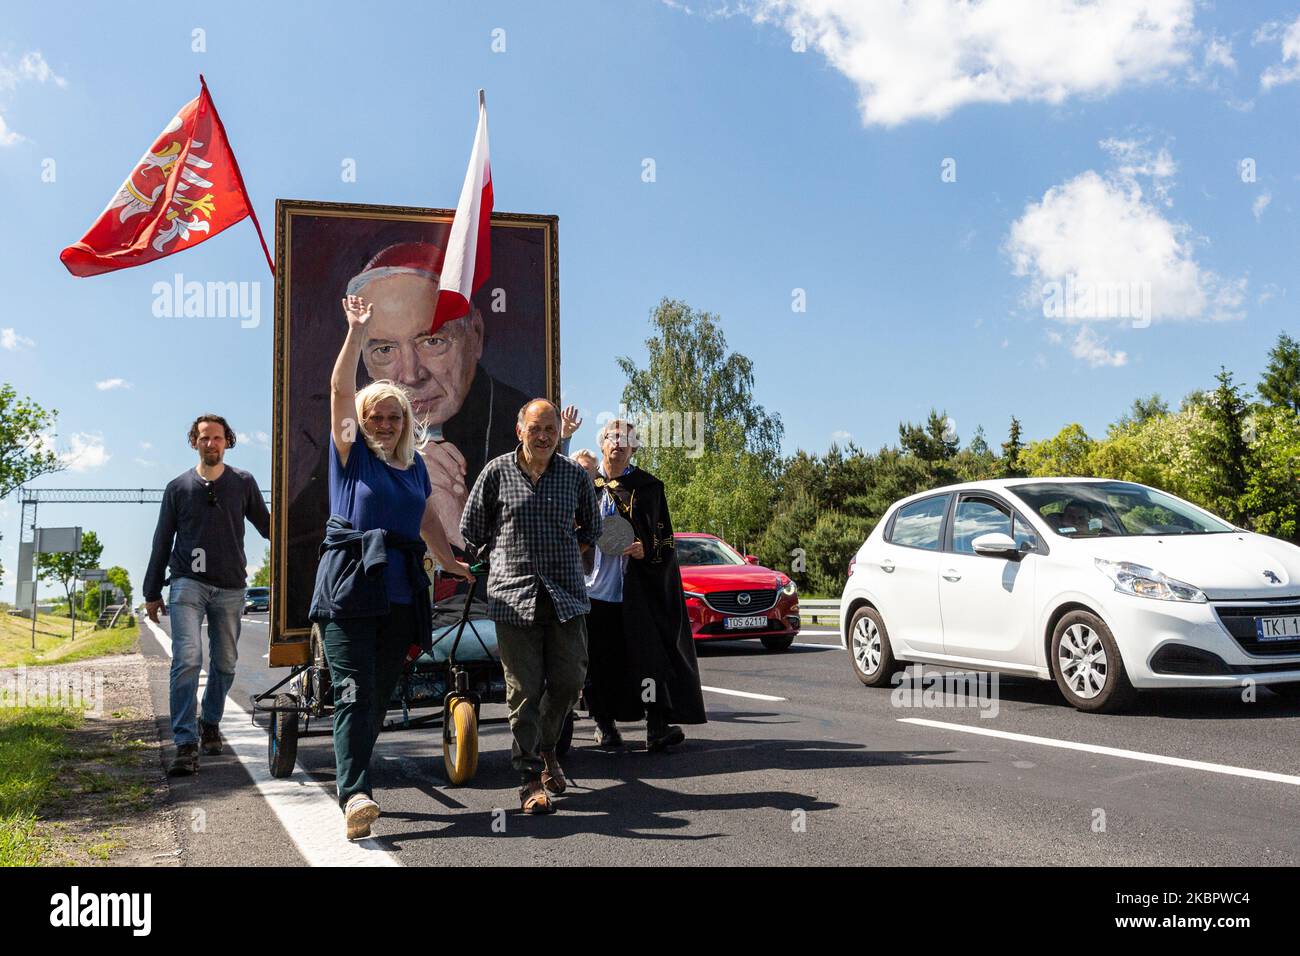 A group of faithful pushing a banner of a Polish cardinal Stefan Wyszynski walks on a highway leading to Warsaw from the south on June 6, 2020 in Warsaw, Poland. Cardinal Wyszynski, a very prominent figure of Polish opposition movement during communistic times, will gain an official status of blessed on June 7 in Warsaw. The group of faithful took days of precession to observe the ceremony in Warsaw. An interest in religion has increased in recent years. (Photo by Dominika Zarzycka/NurPhoto) Stock Photo